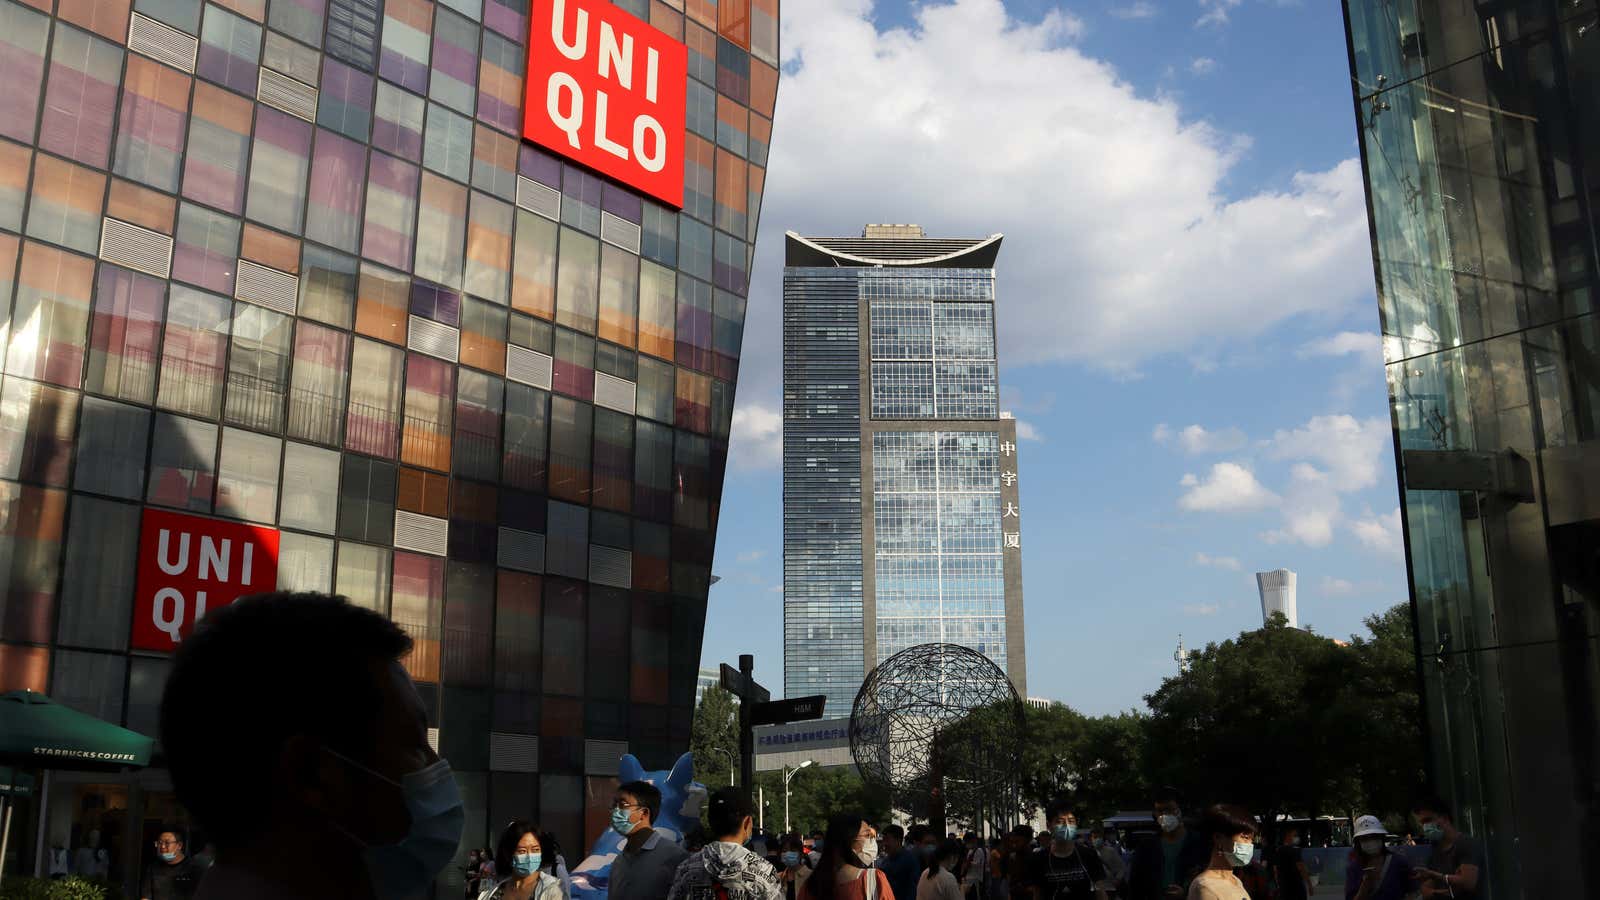 7 Ways Uniqlo Plans to Take Over the Clothing Industry via WOM